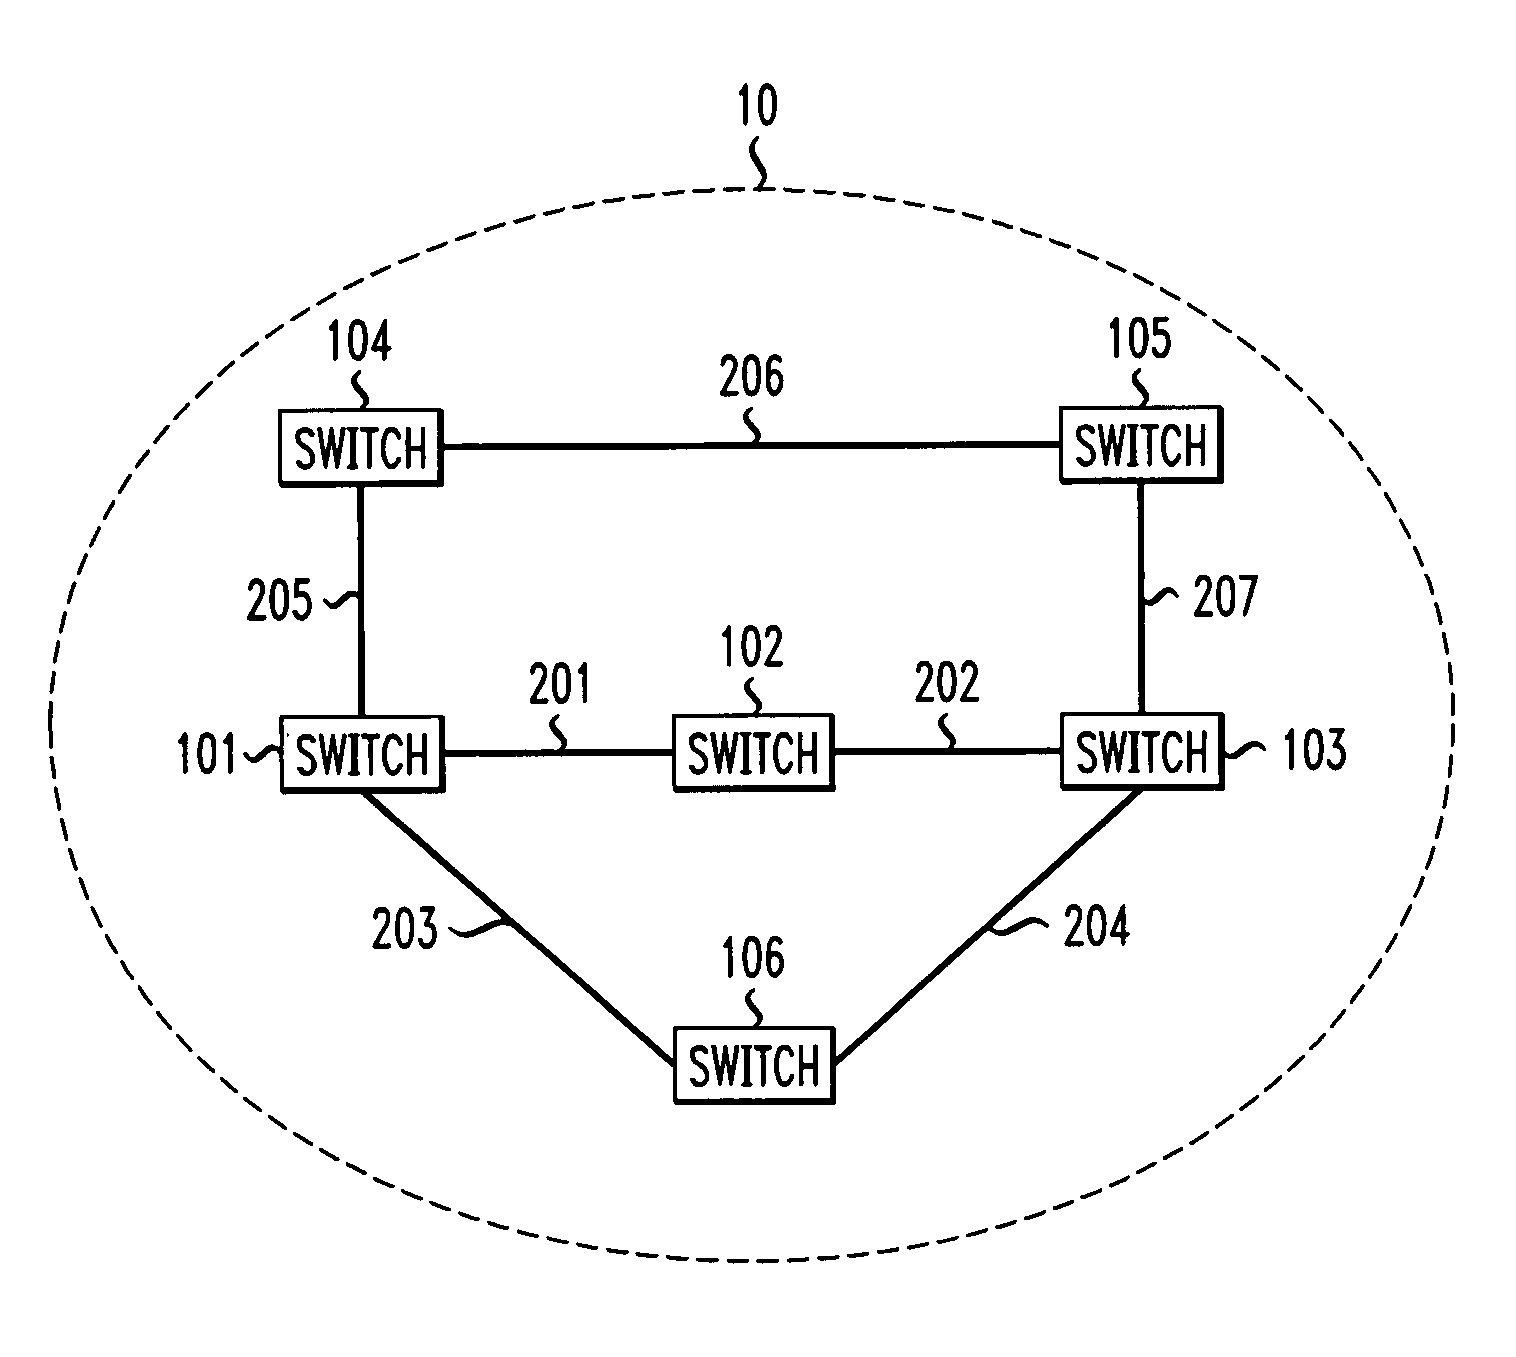 Scheme for routing circuits with dynamic self-adjusting link weights in a network